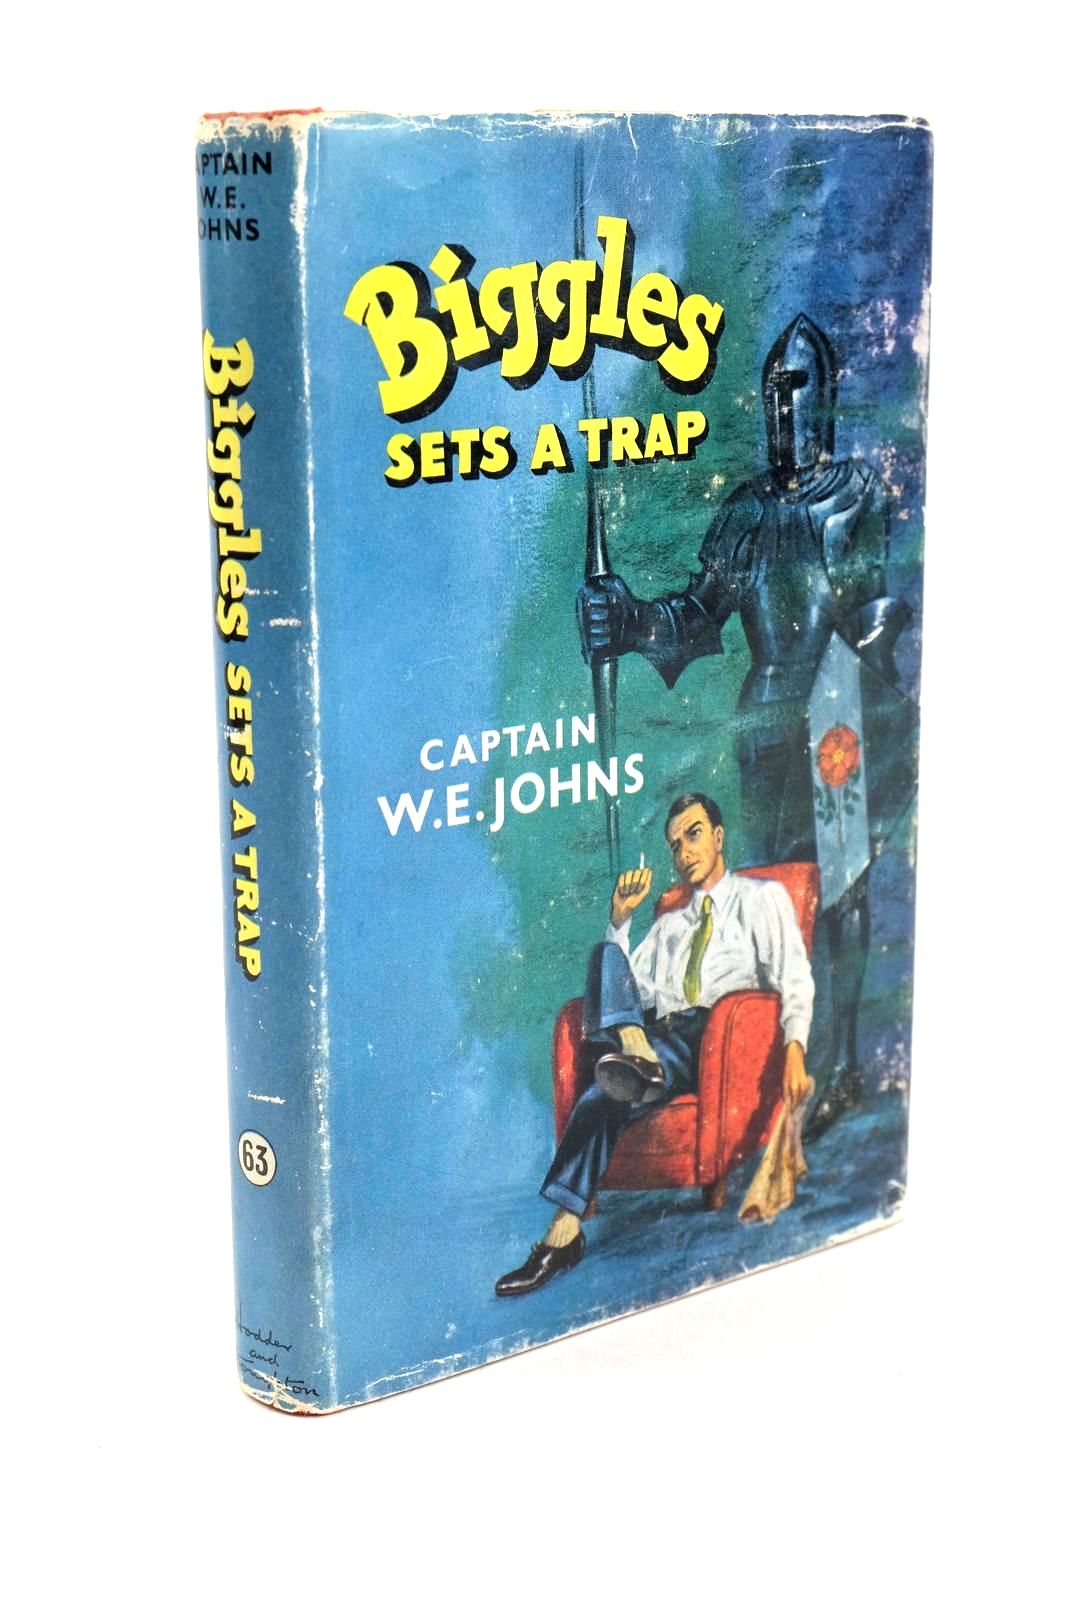 Photo of BIGGLES SETS A TRAP written by Johns, W.E. illustrated by Stead,  published by Hodder &amp; Stoughton (STOCK CODE: 1324109)  for sale by Stella & Rose's Books